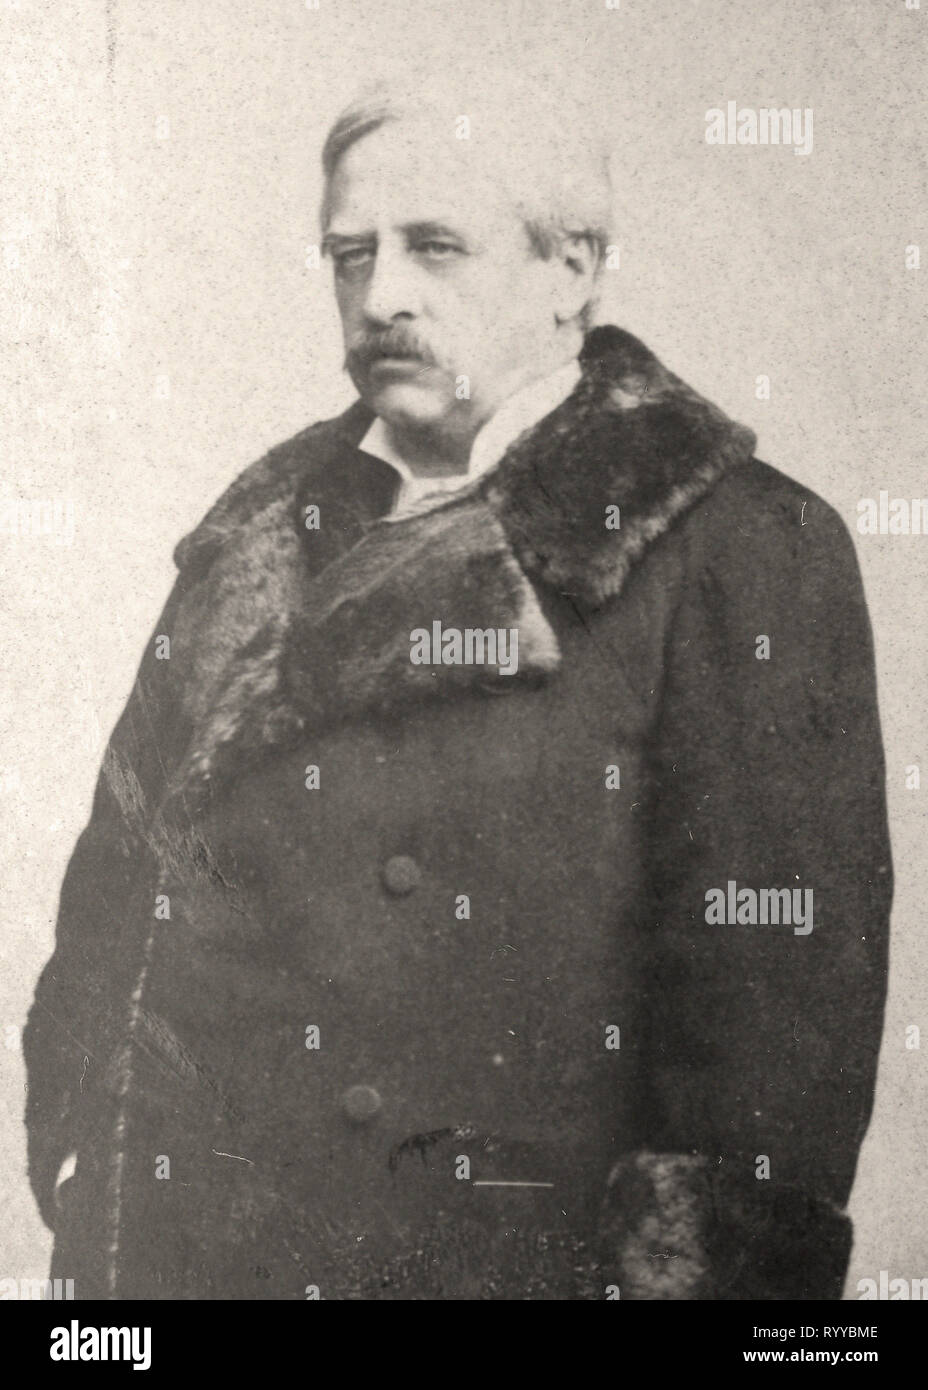 Photographic Portrait Of Nordenskild   From Collection Félix Potin, Early 20th Century Stock Photo